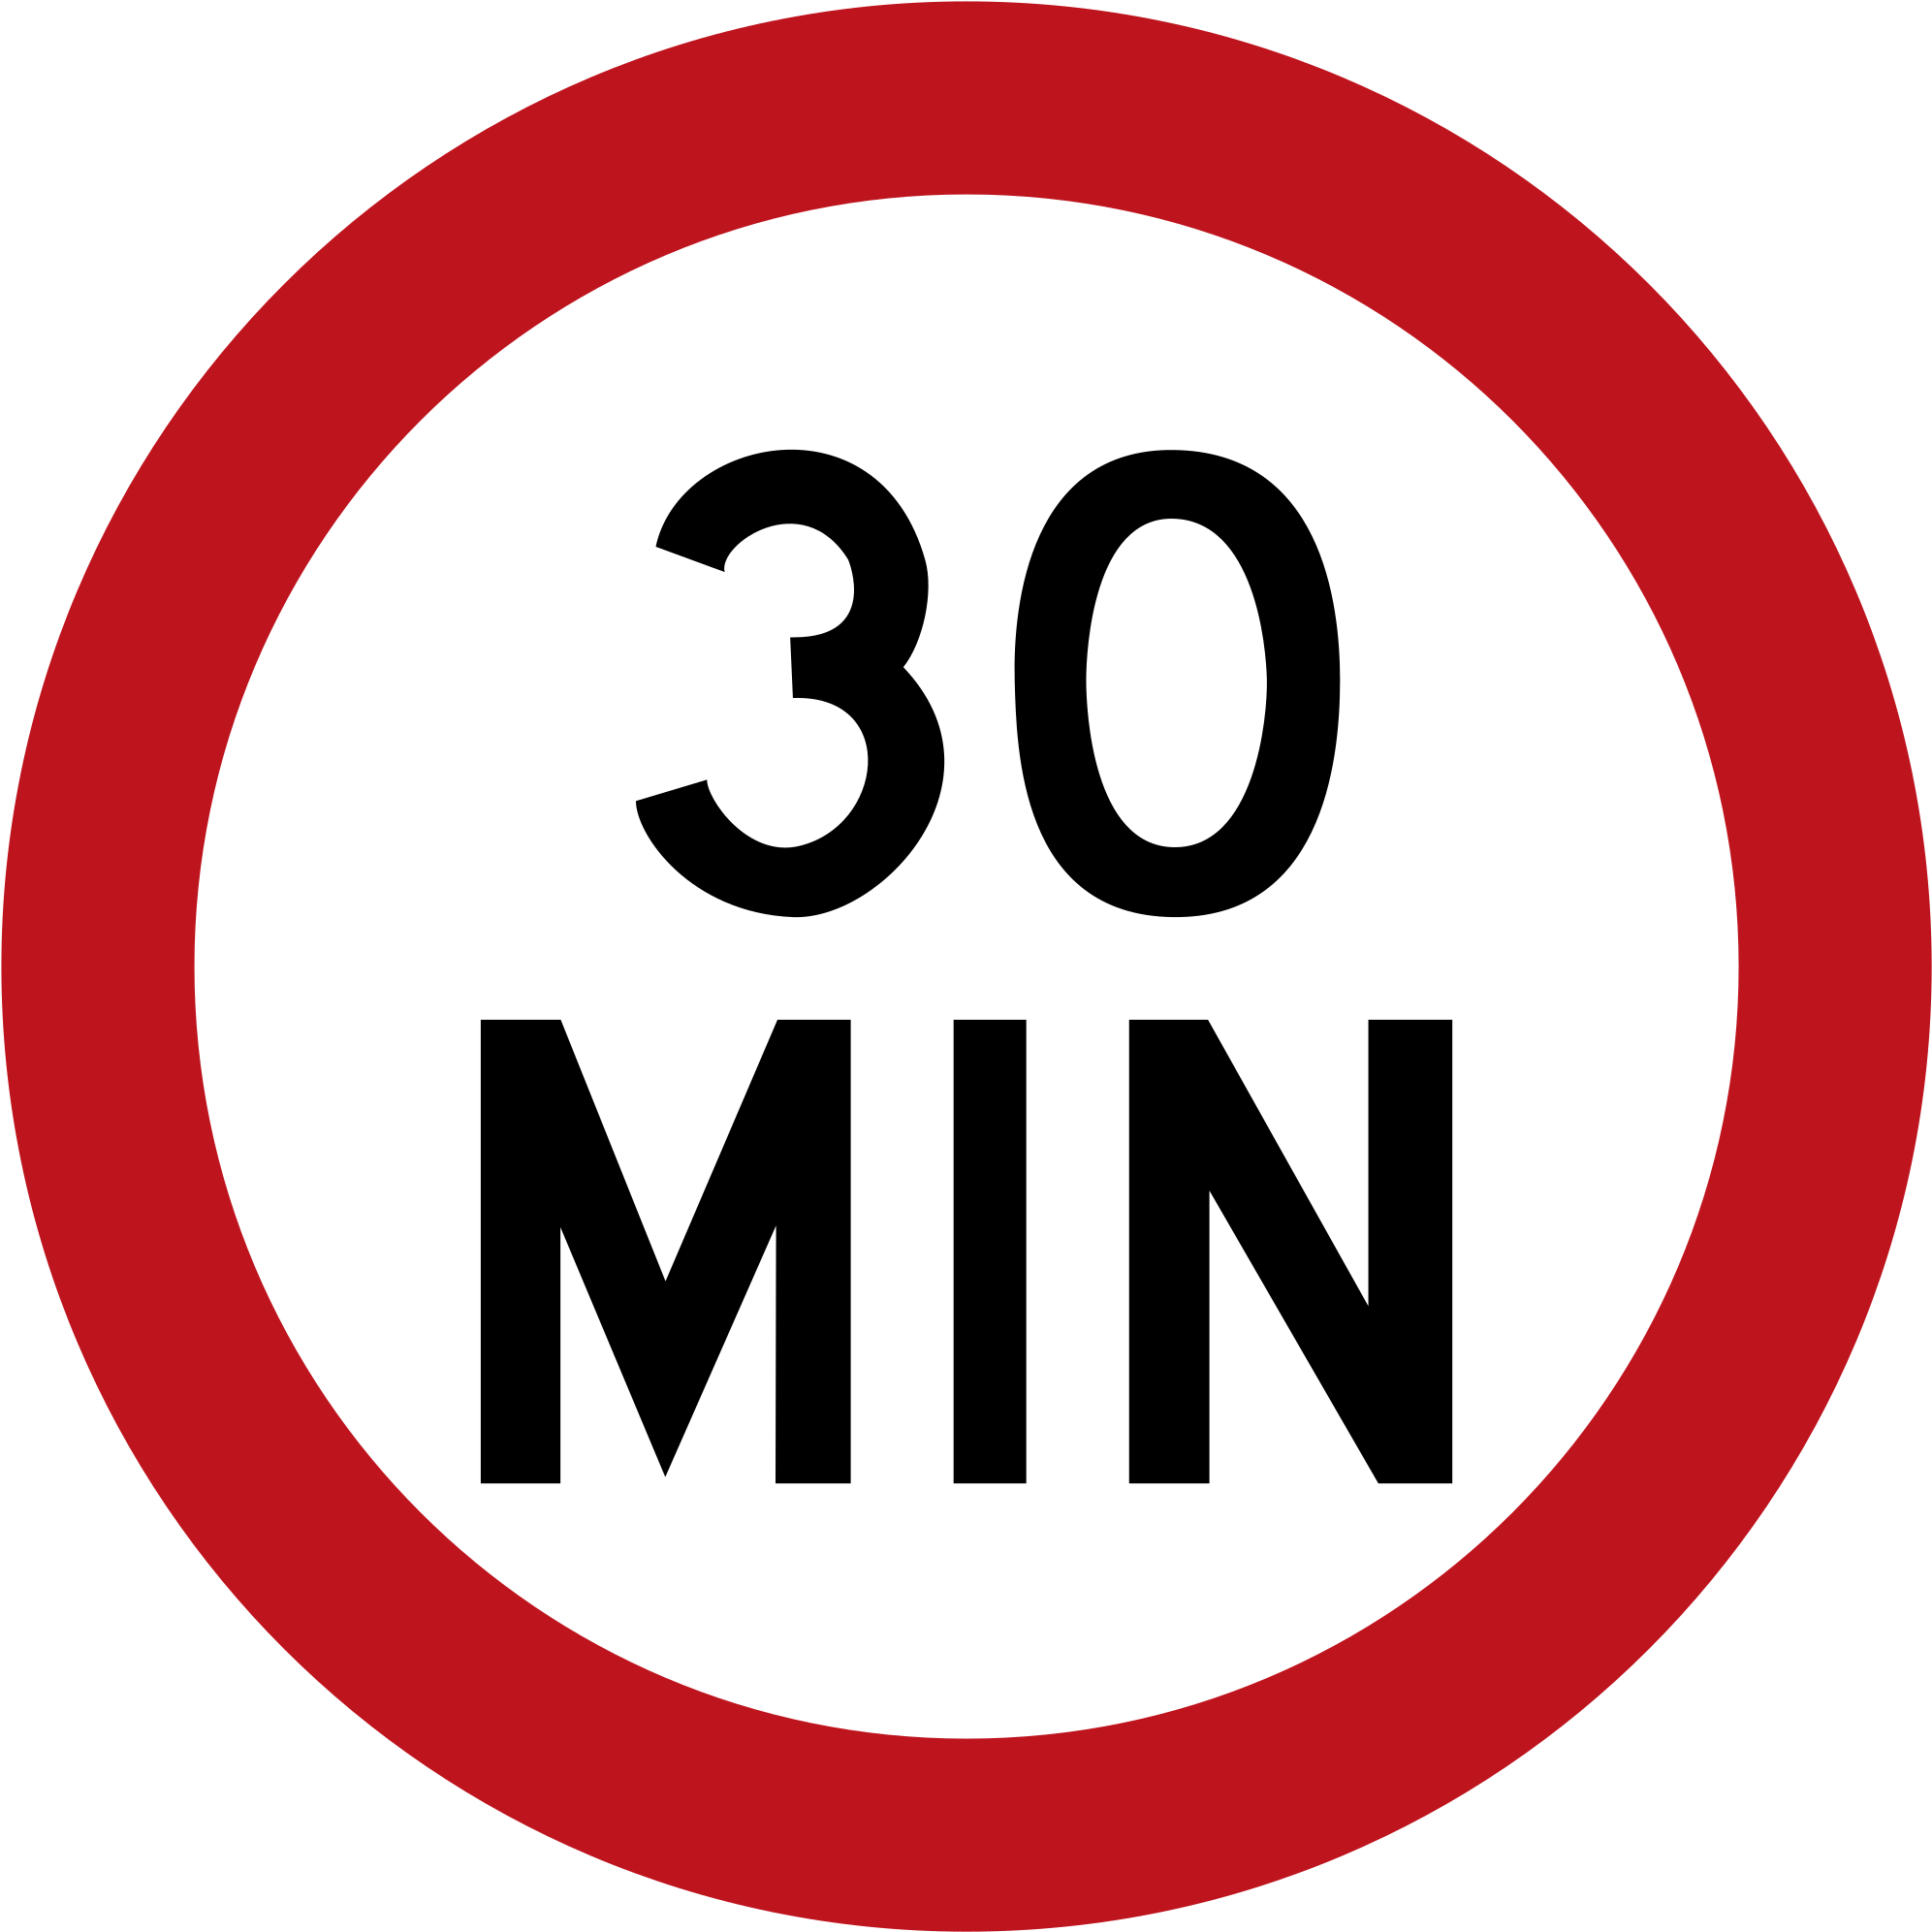 Open - 80 Km Road Sign (2000x2000)